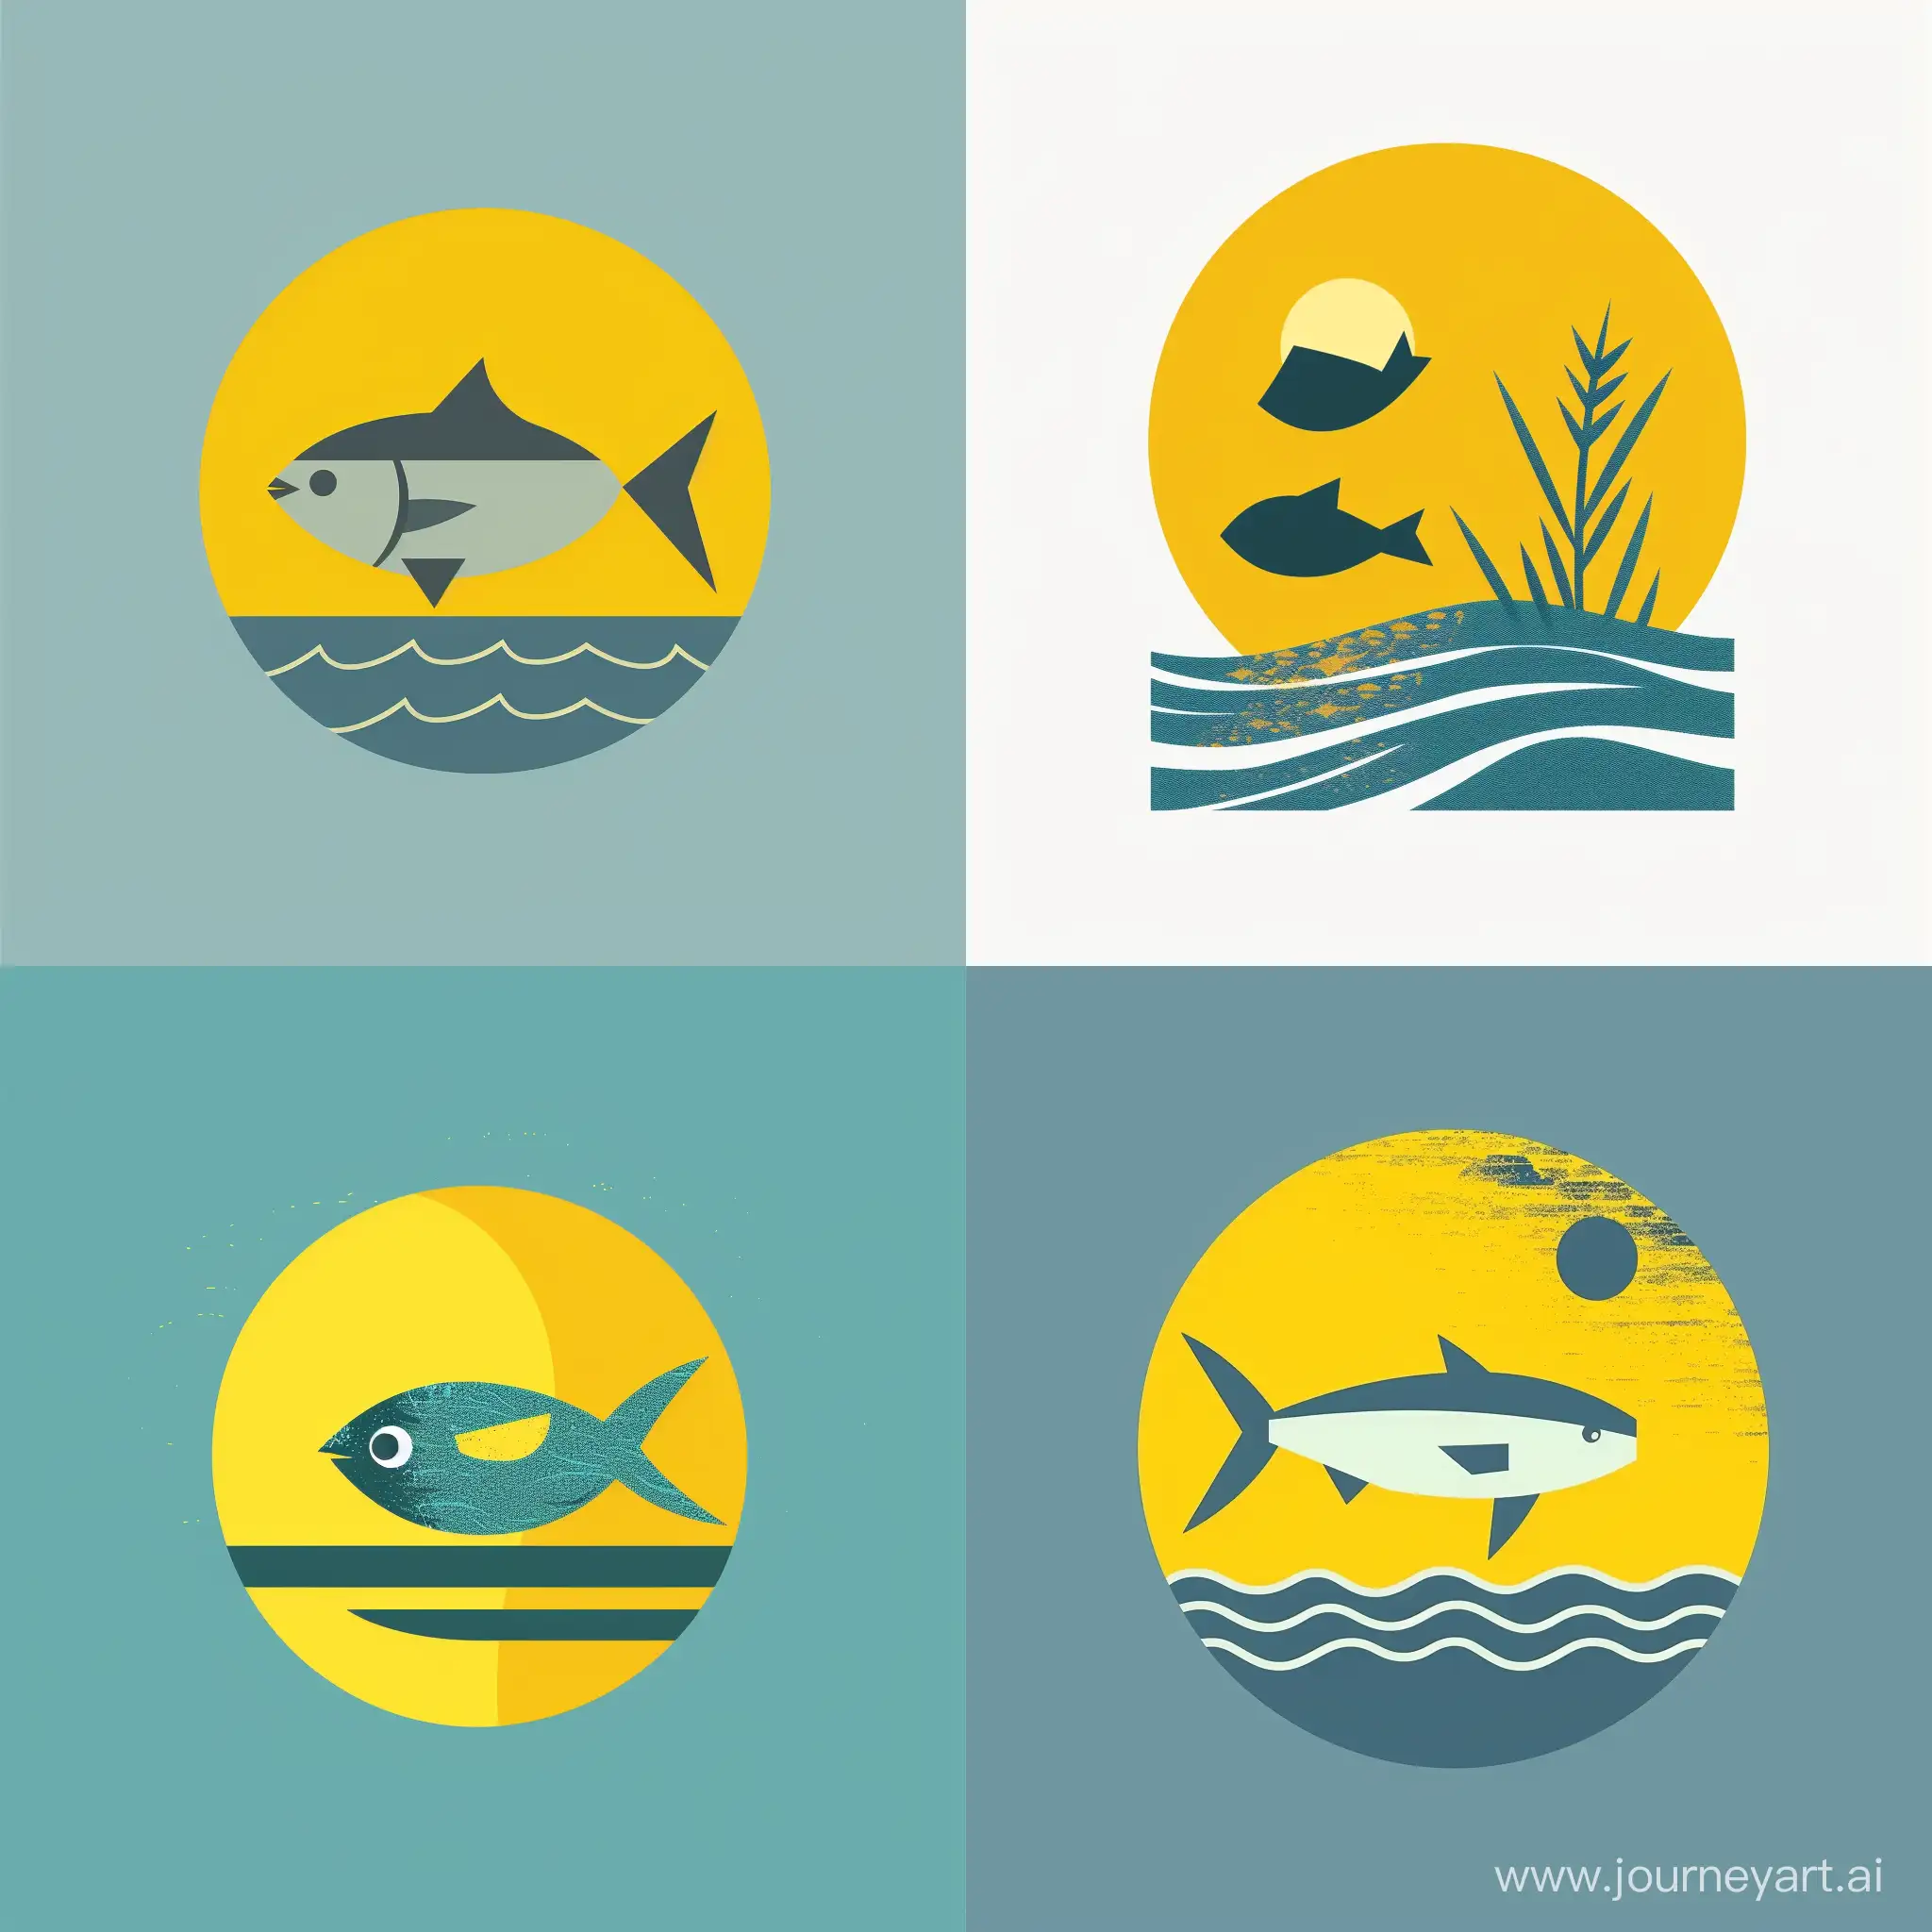 Design a logo with a combination of a yellow circle, the sea, and a fish that represents the cultivation of all kinds of aquatic animals in a flat style. Also, make sure that the style of the logo is updated and flat. Don't forget to use grain in the logo. Also, the fish should be flat.  And it should be simple in the logo, the color of the template in this logo should be blue, but the yellow circle should be present in this logo to show the sun